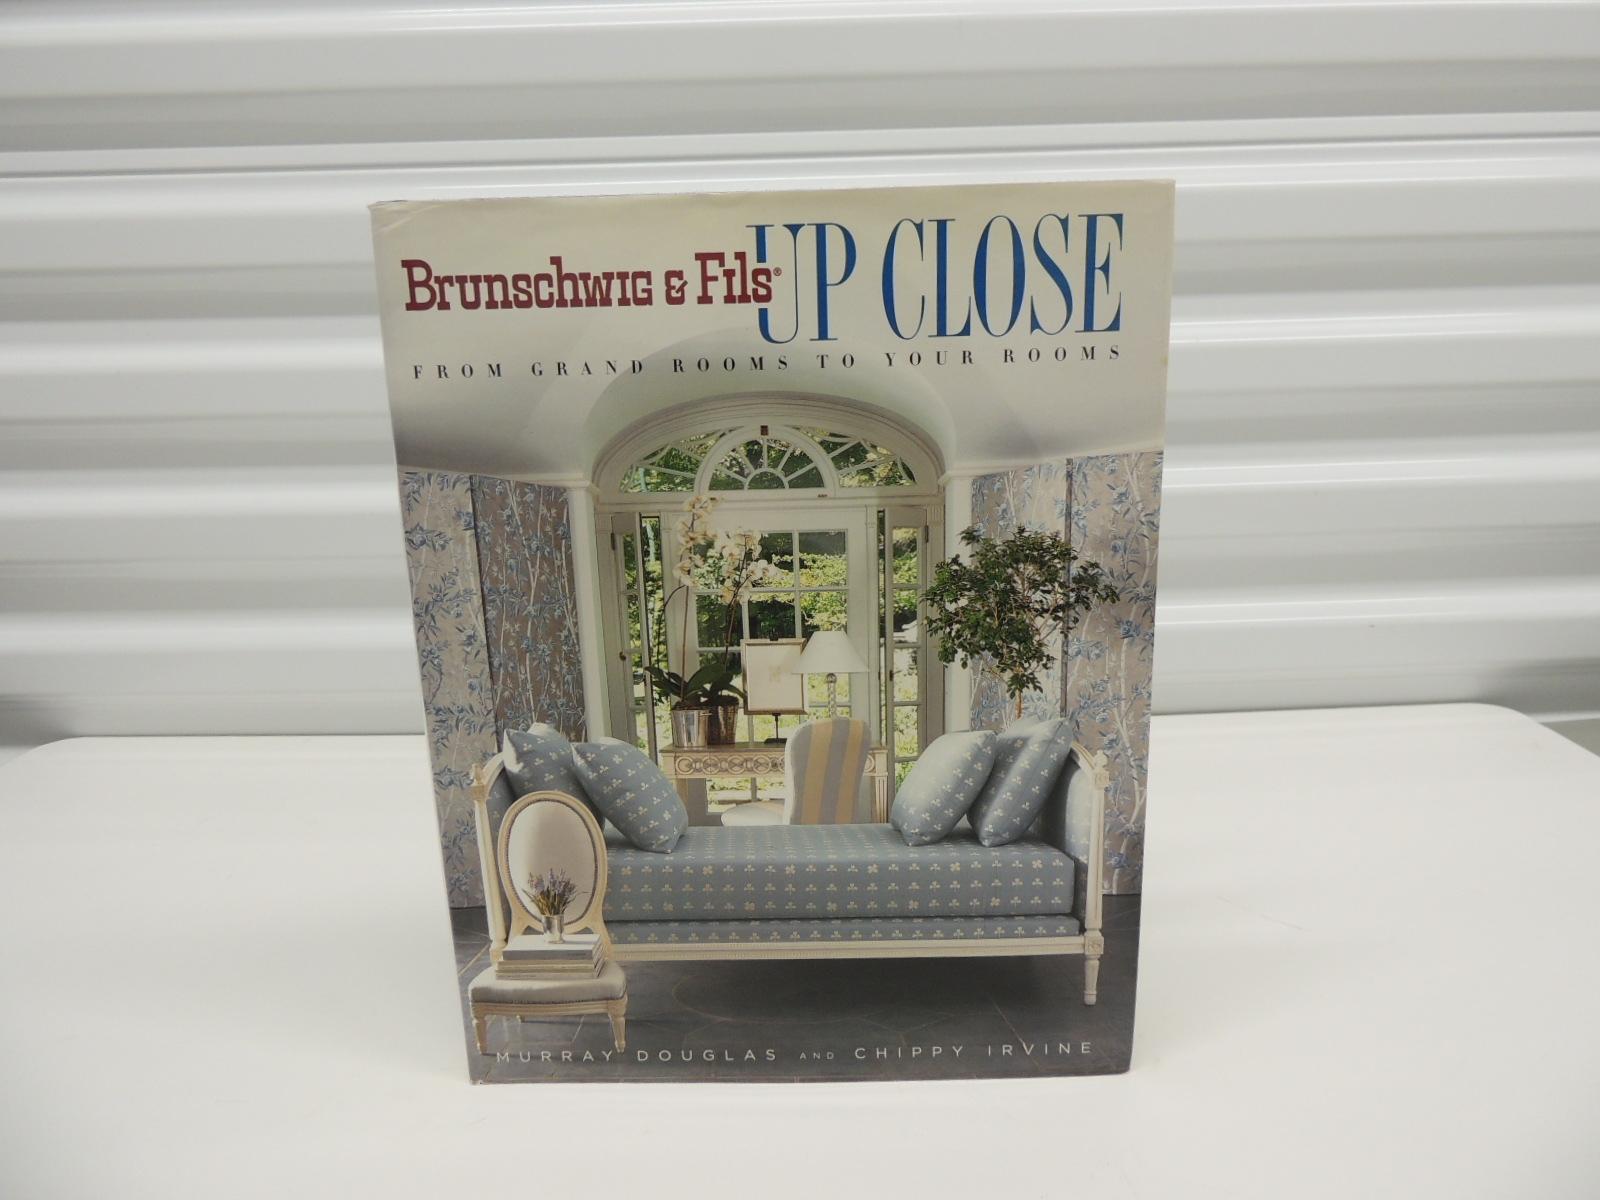 Focusing on Brunschwig & Fils, one of the most renowned textile decor companies in the world, this book transports readers from grand rooms in the White House and the Palace of Versailles to romantic Irish cottages and Southern homes to reveal a